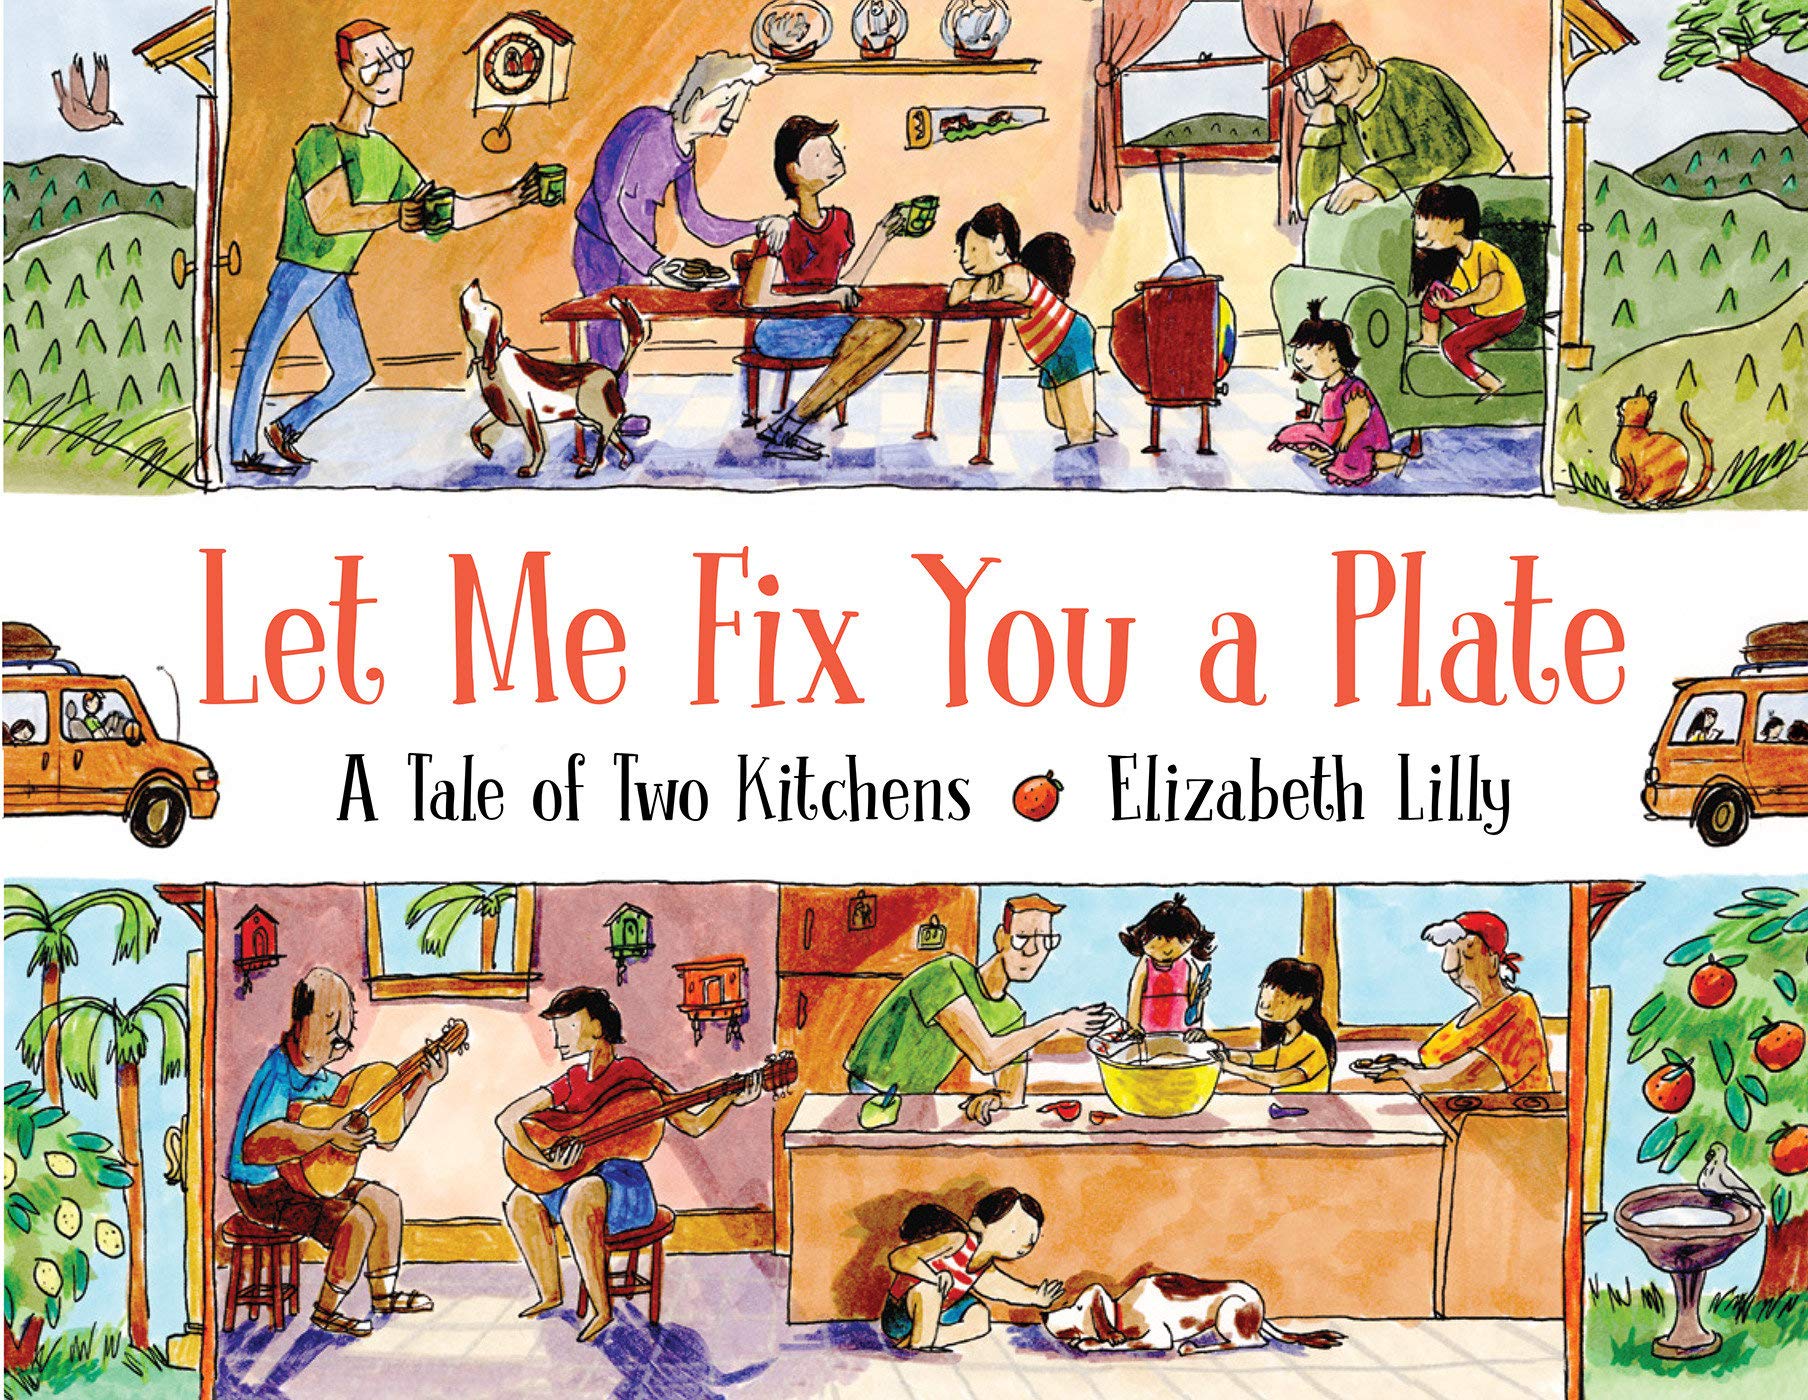 Let Me Fix You a Plate: A Tale of Two Kitchens (Elizabeth Lilly)